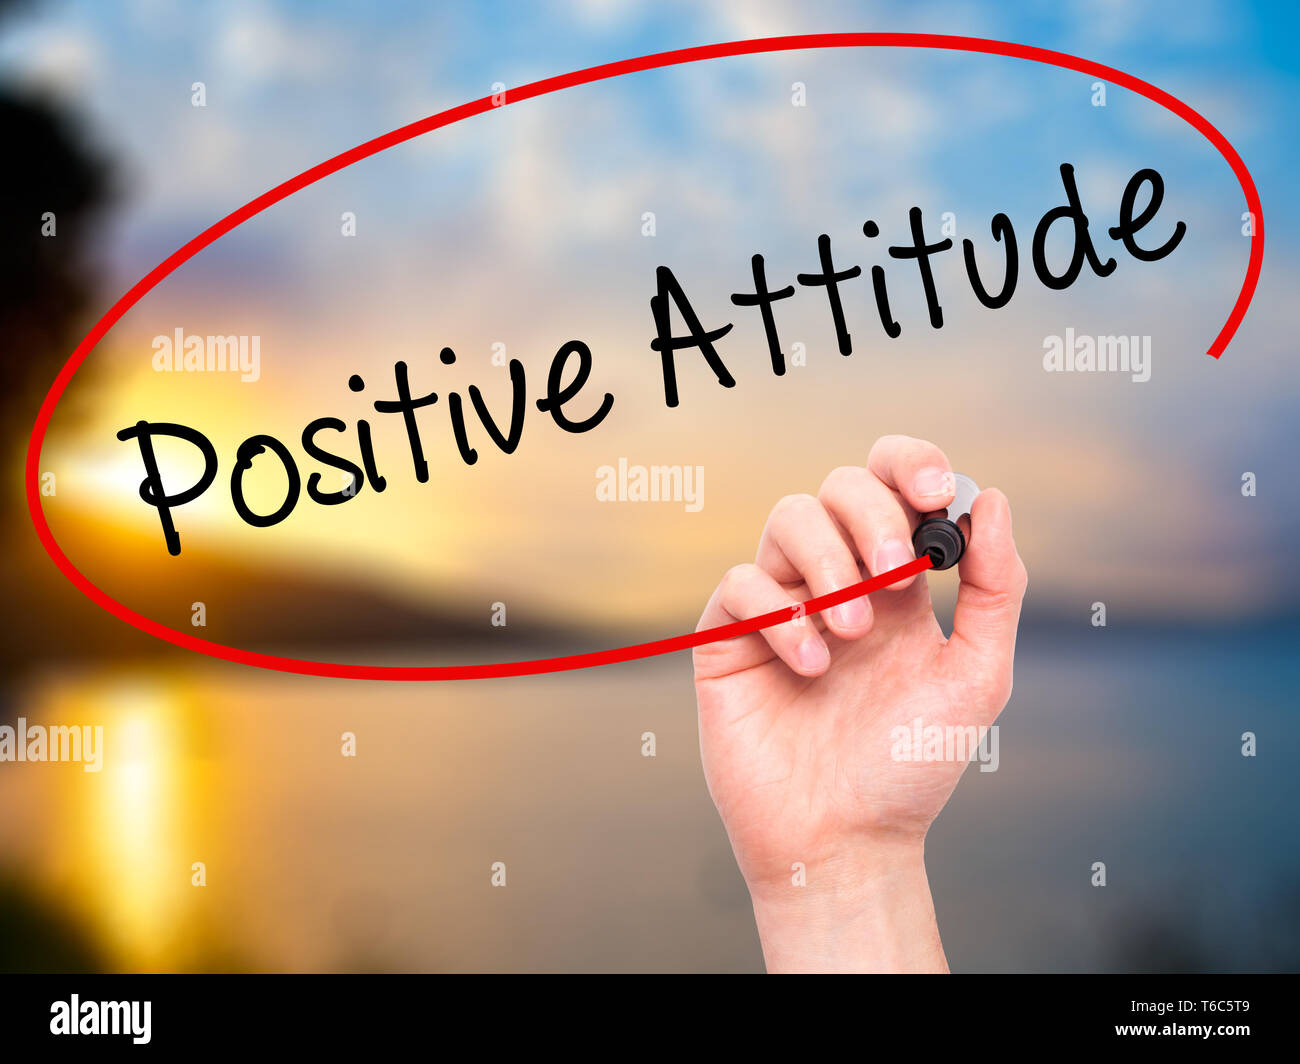 Man Hand writing Positive Attitude with black marker on visual screen. Stock Photo